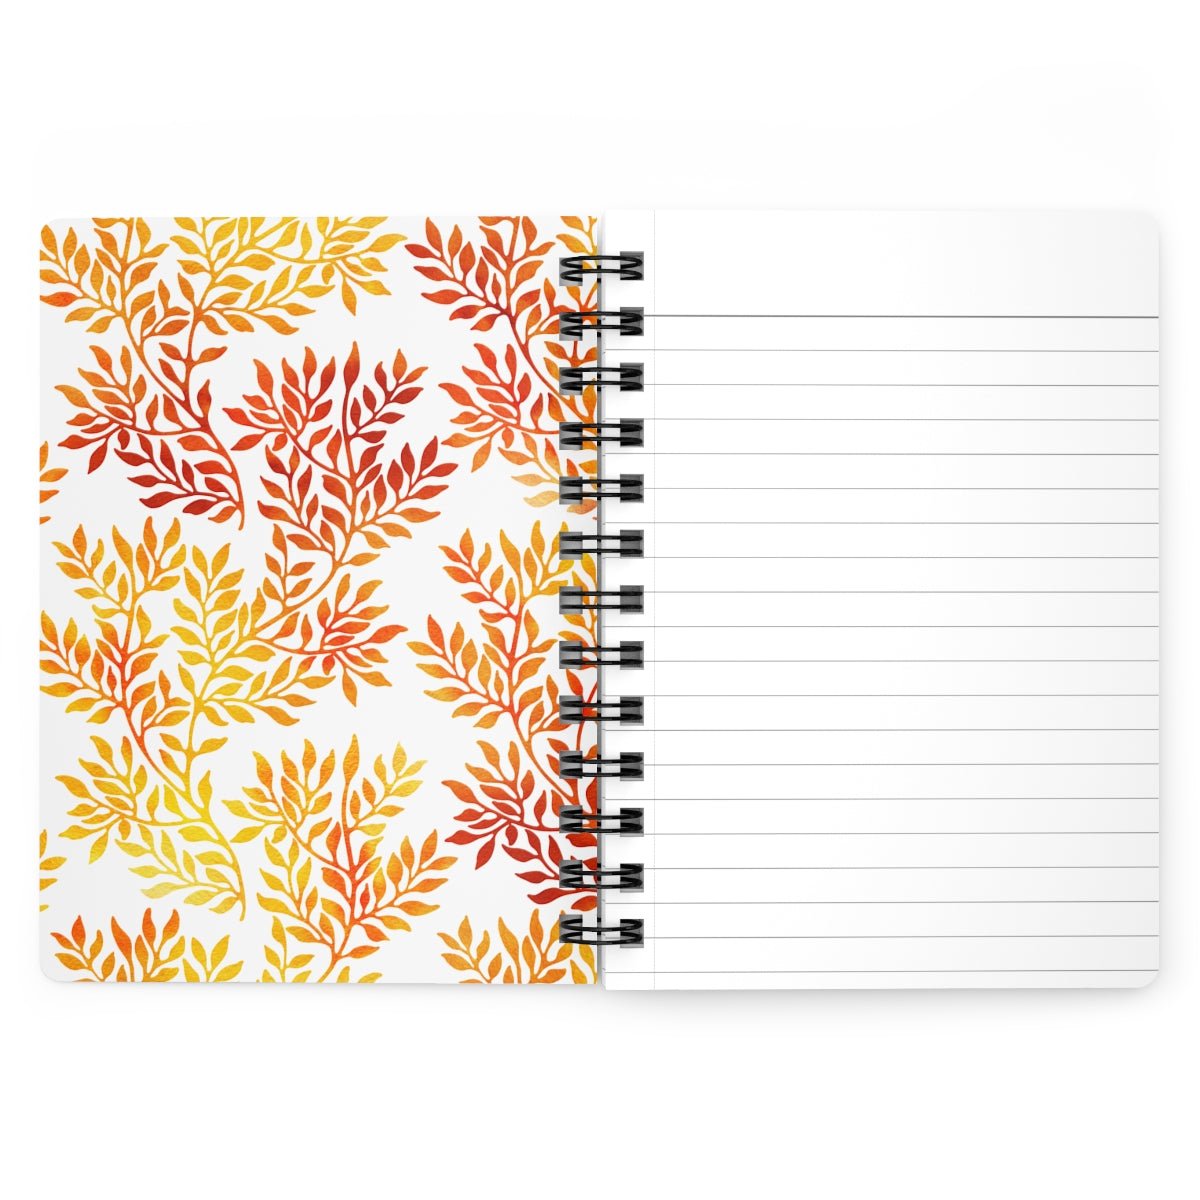 Fall Red and Orange Leaves Spiral Bound Journal - Puffin Lime